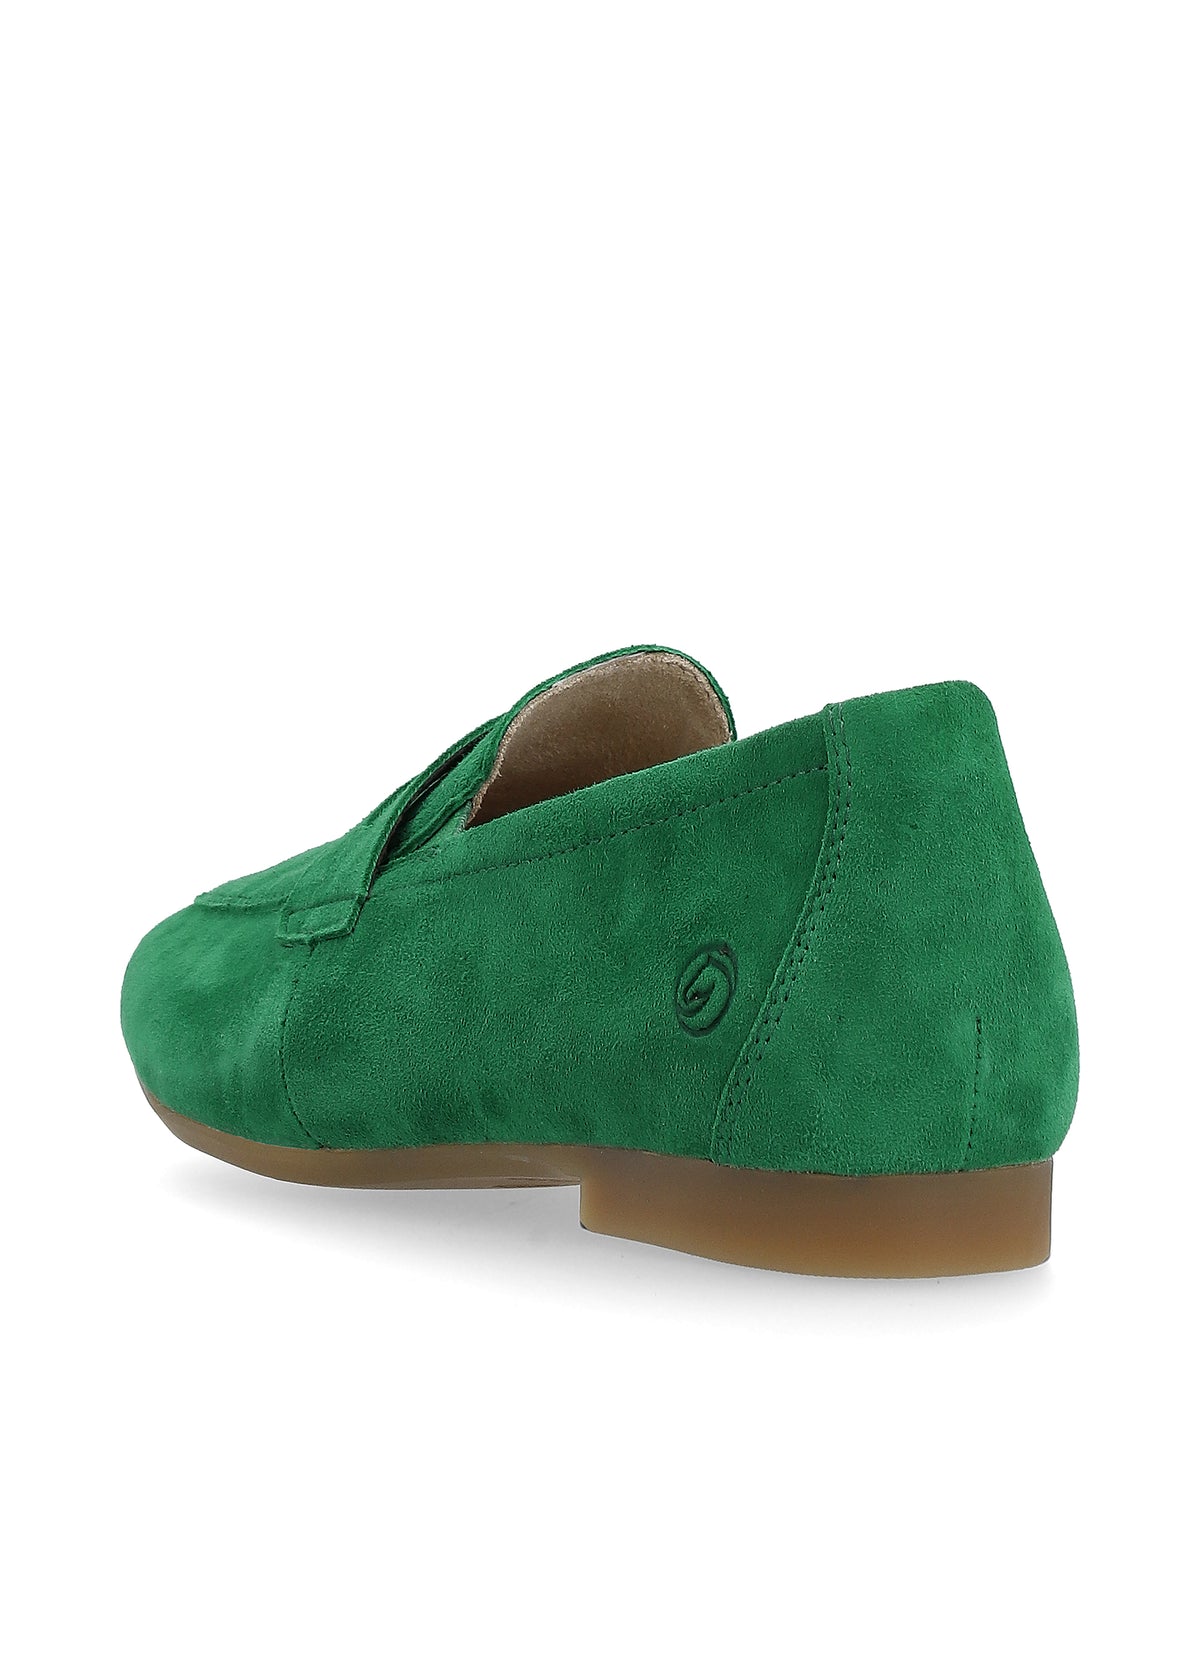 Loafers - green suede leather, loafer strap as decoration